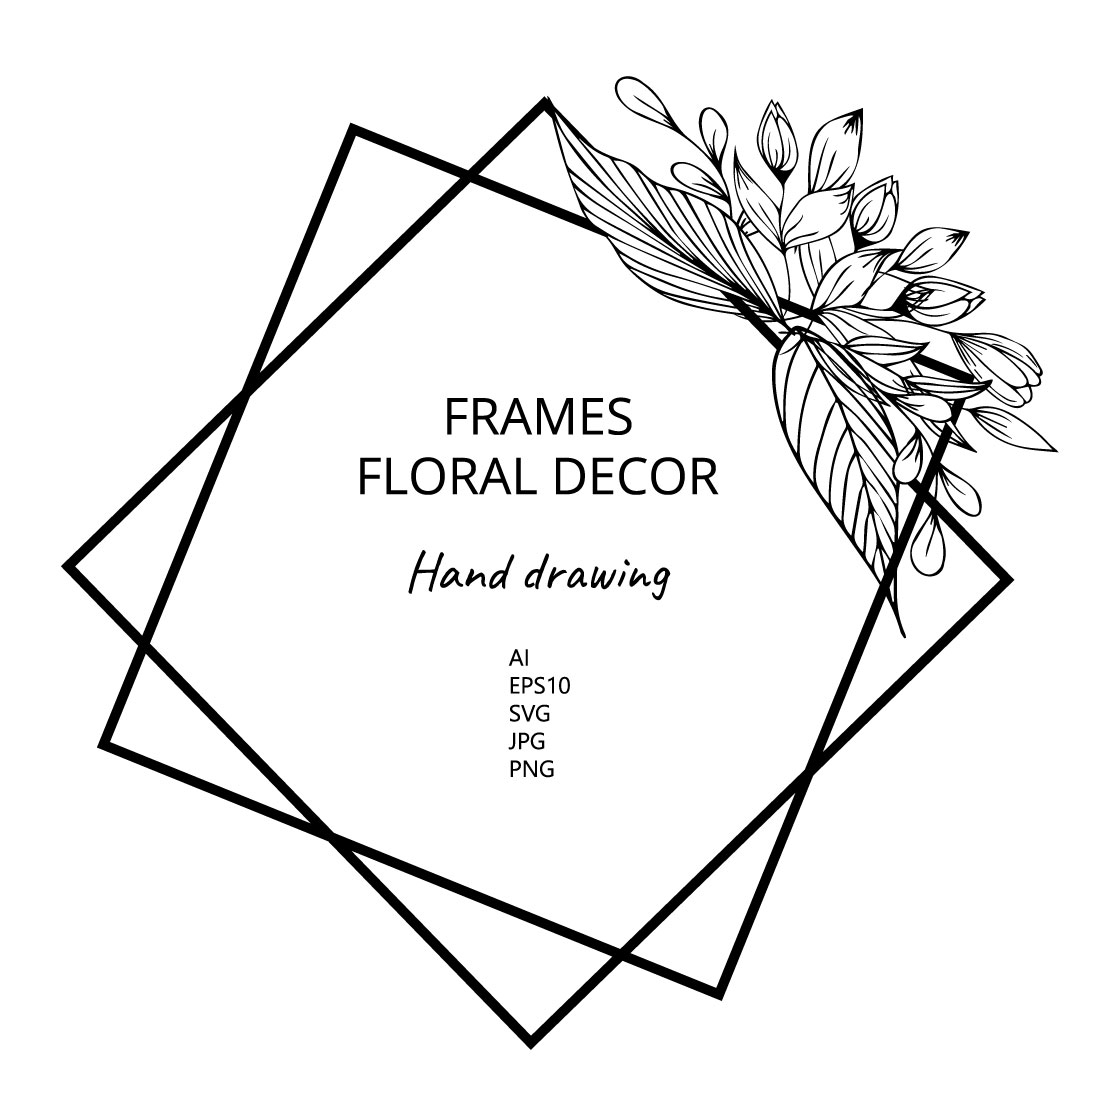 Frame with Floral Decor and Elements of Decor cover image.